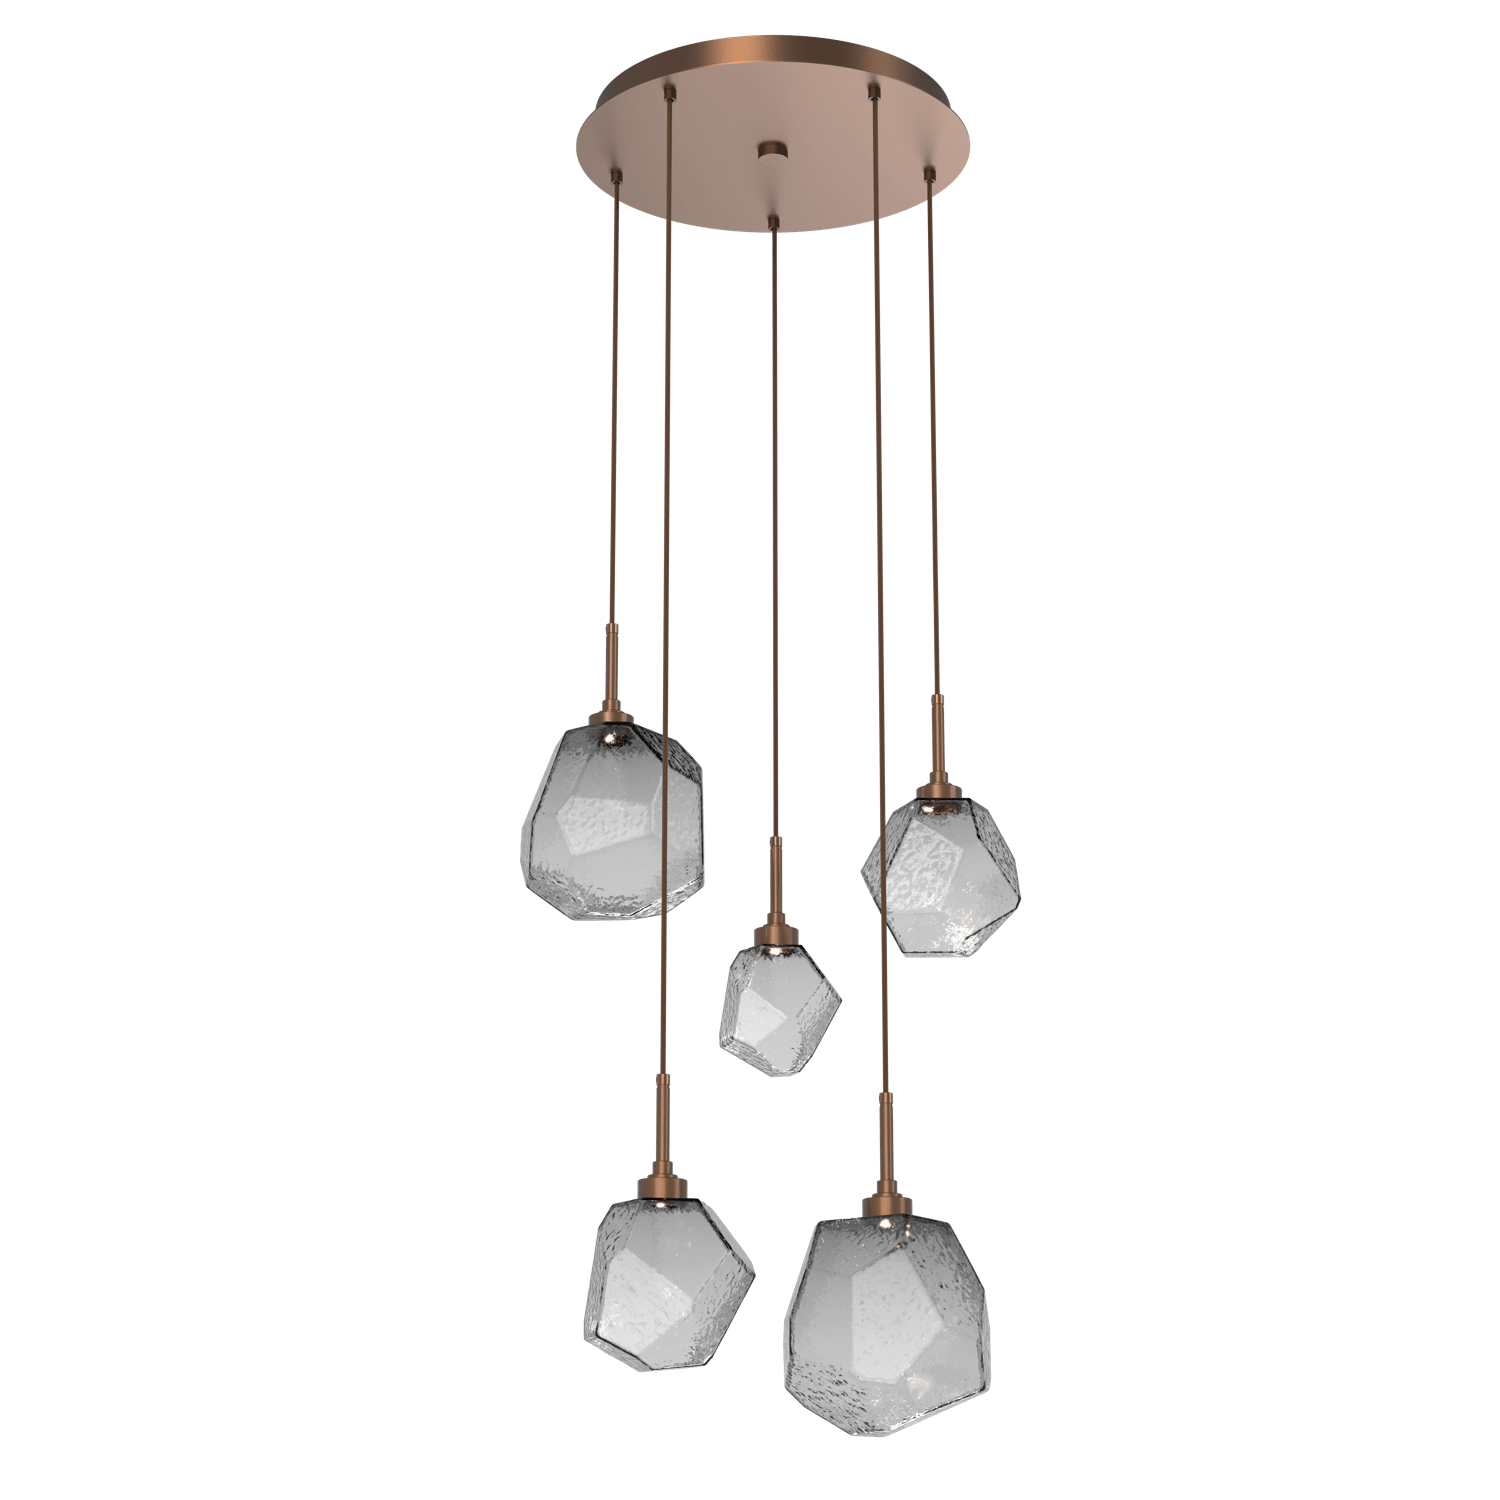 CHB0039-05-BB-S-Hammerton-Studio-Gem-5-light-round-pendant-chandelier-with-burnished-bronze-finish-and-smoke-blown-glass-shades-and-LED-lamping